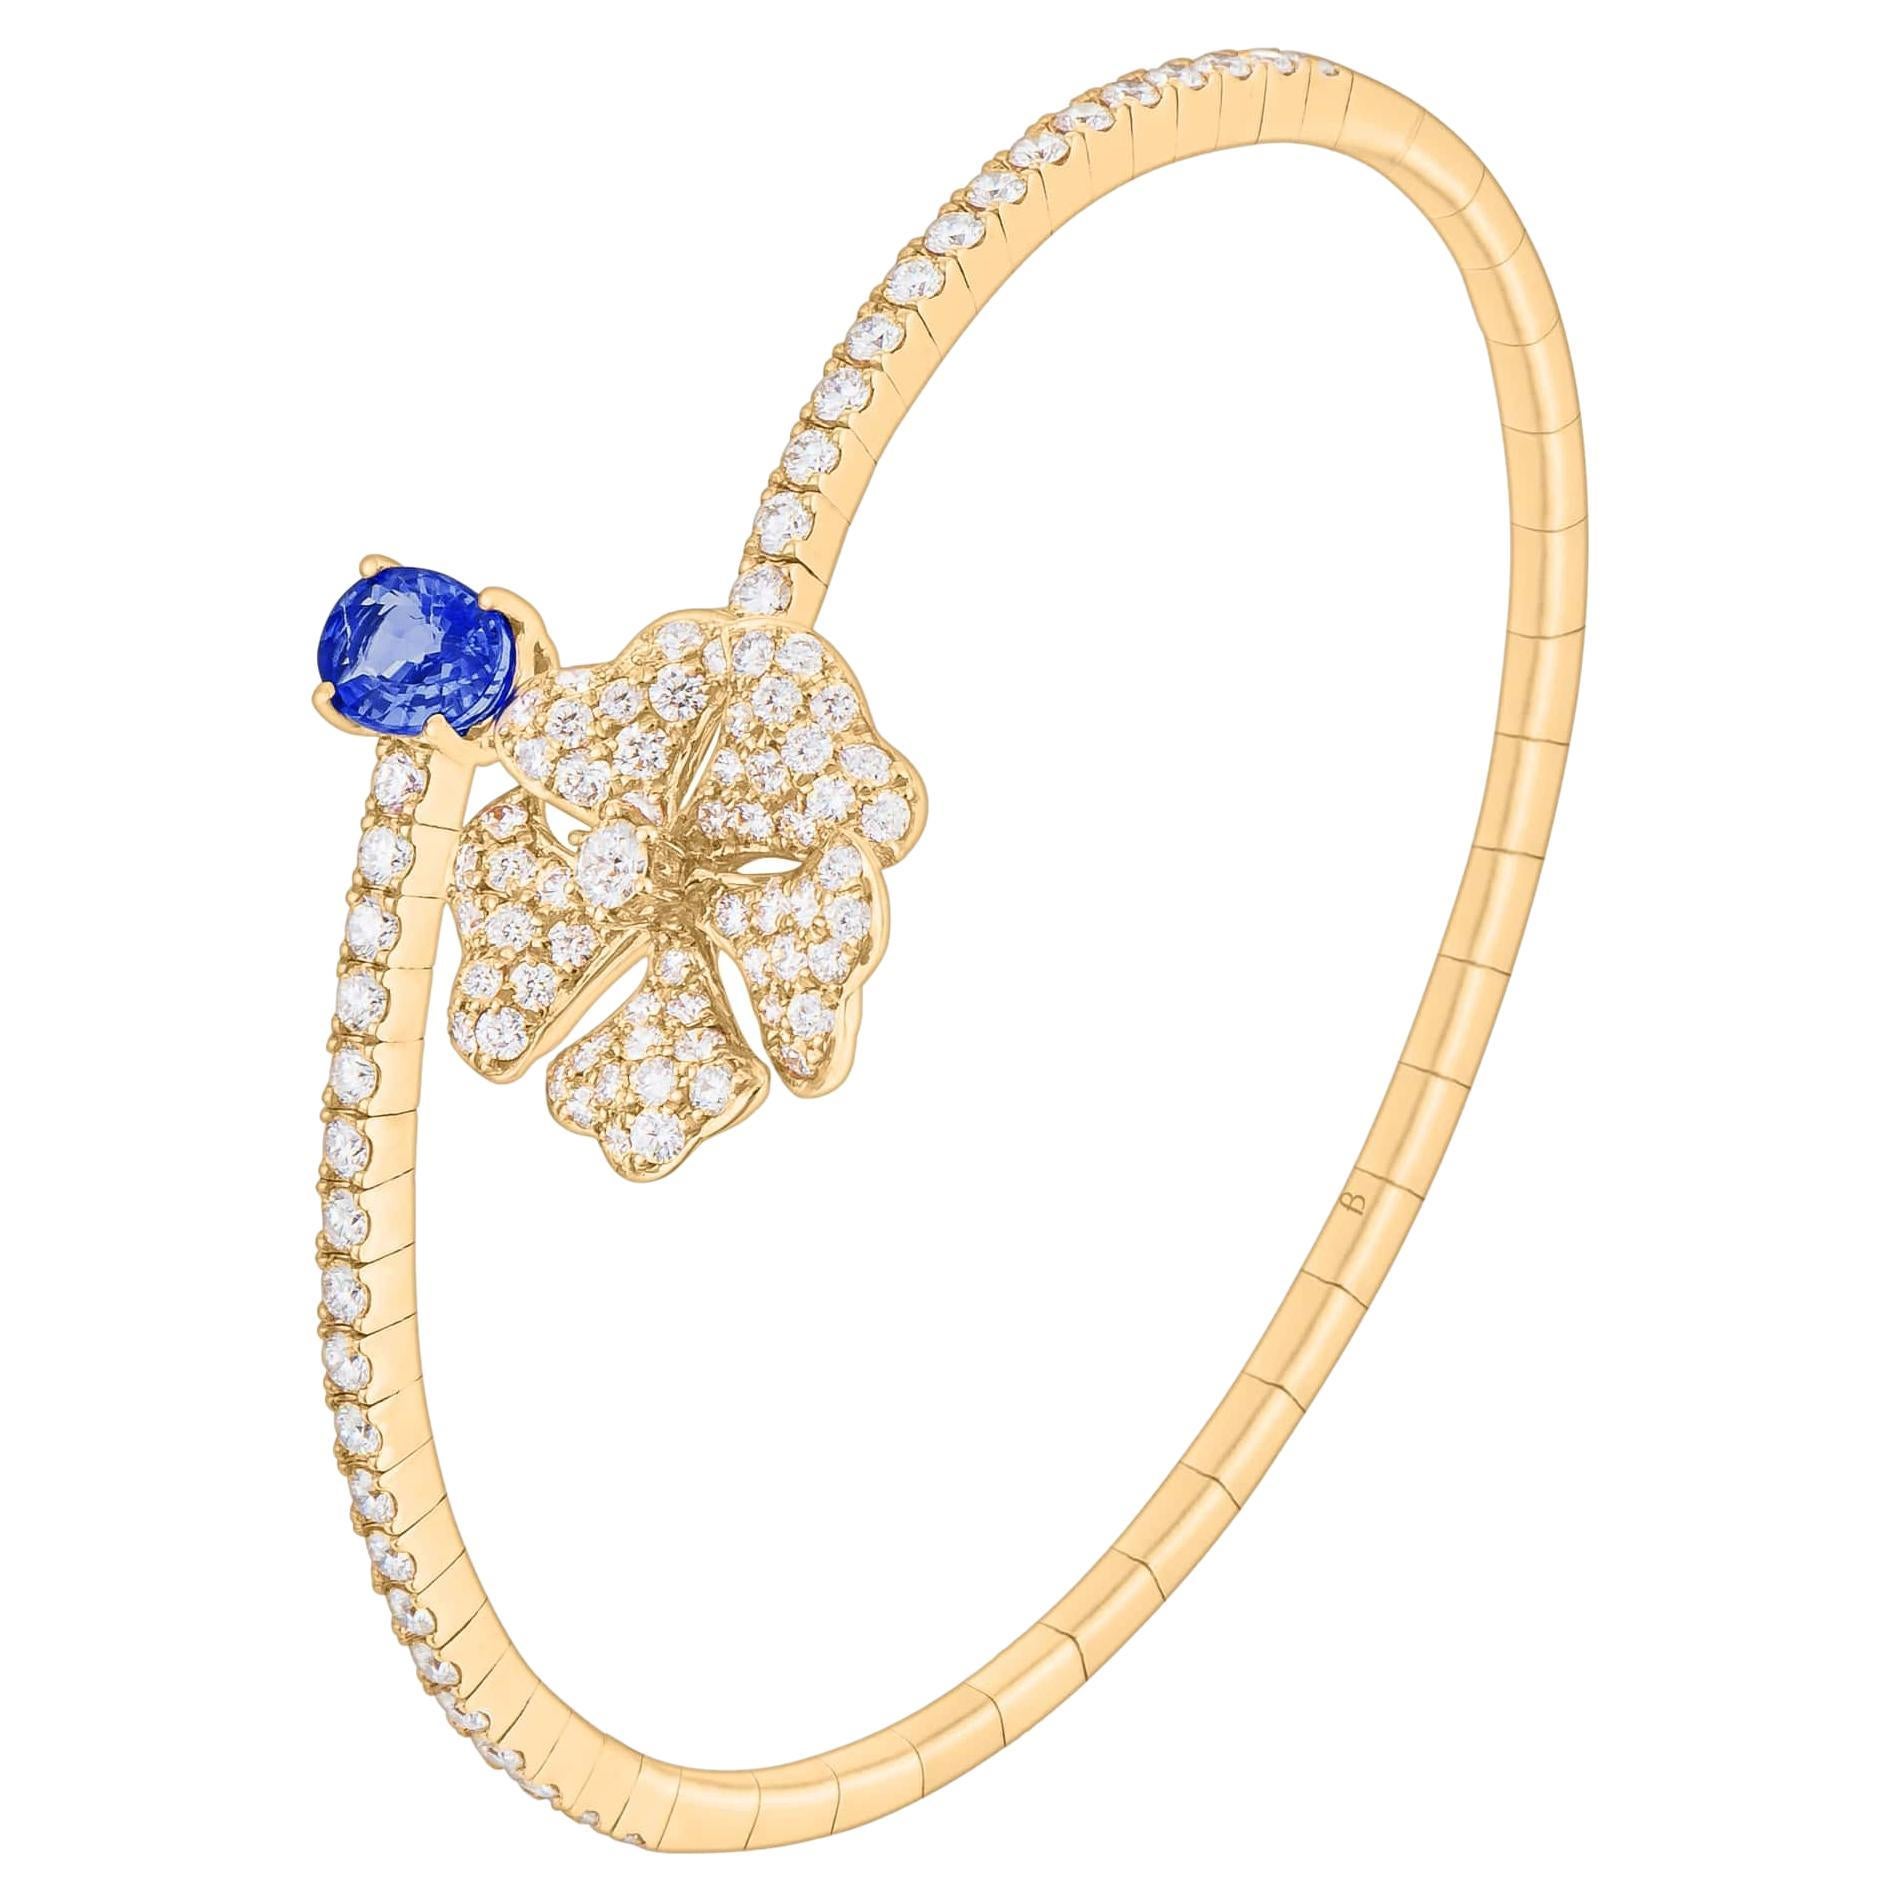 Bloom Blue Sapphire and Diamond Open Spiral Bangle in 18k Yellow Gold